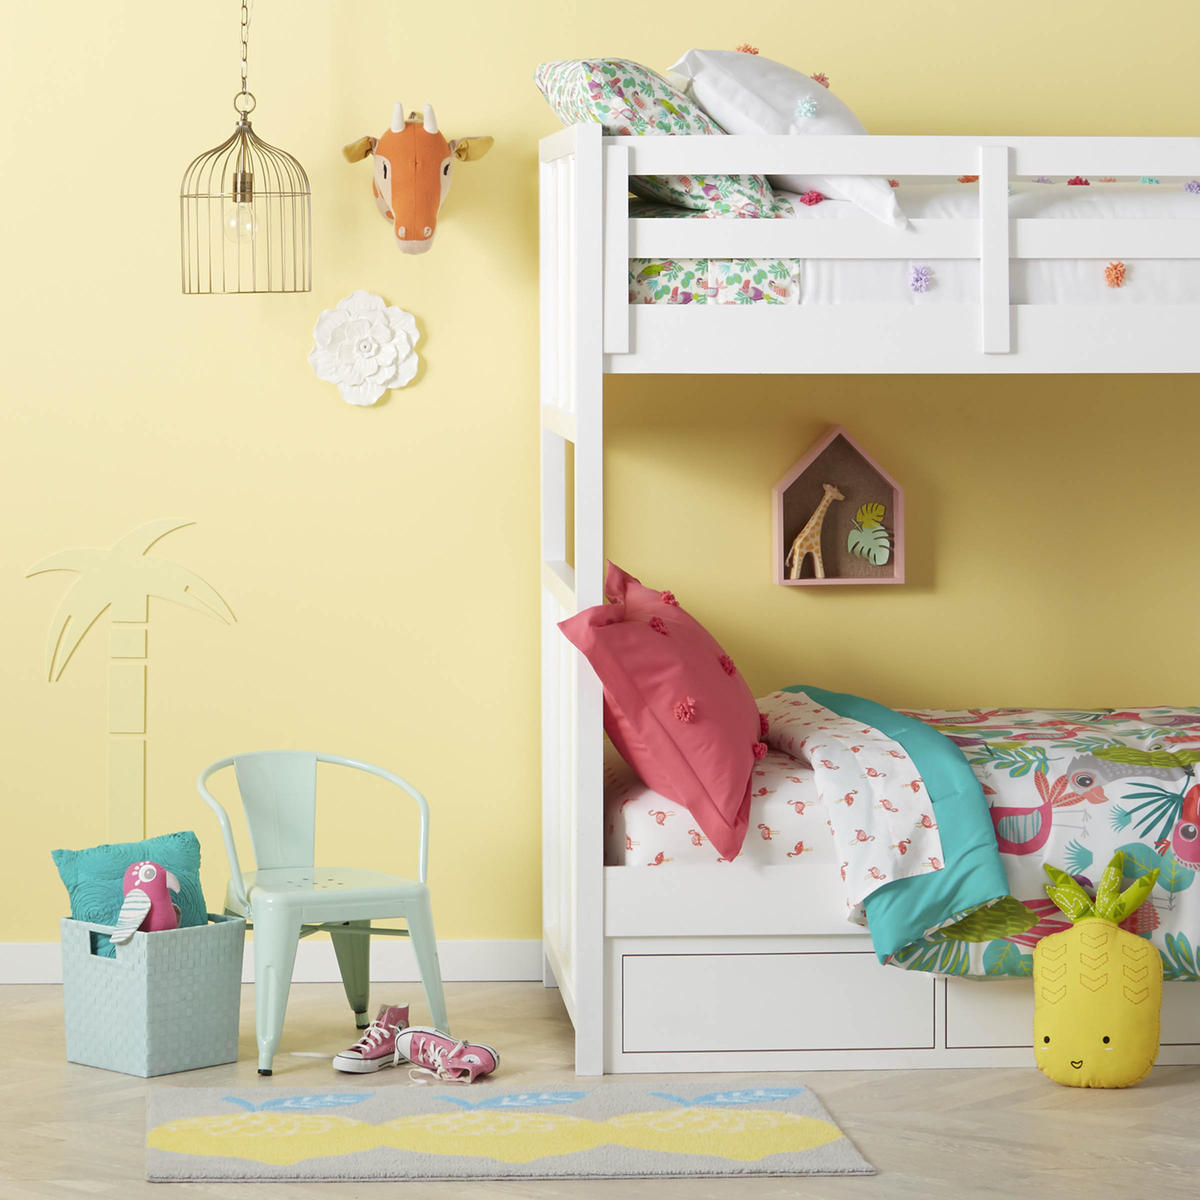 Target Baby Decor
 Cozy Up to Tar s New Pillowfort Kids Decor Collection